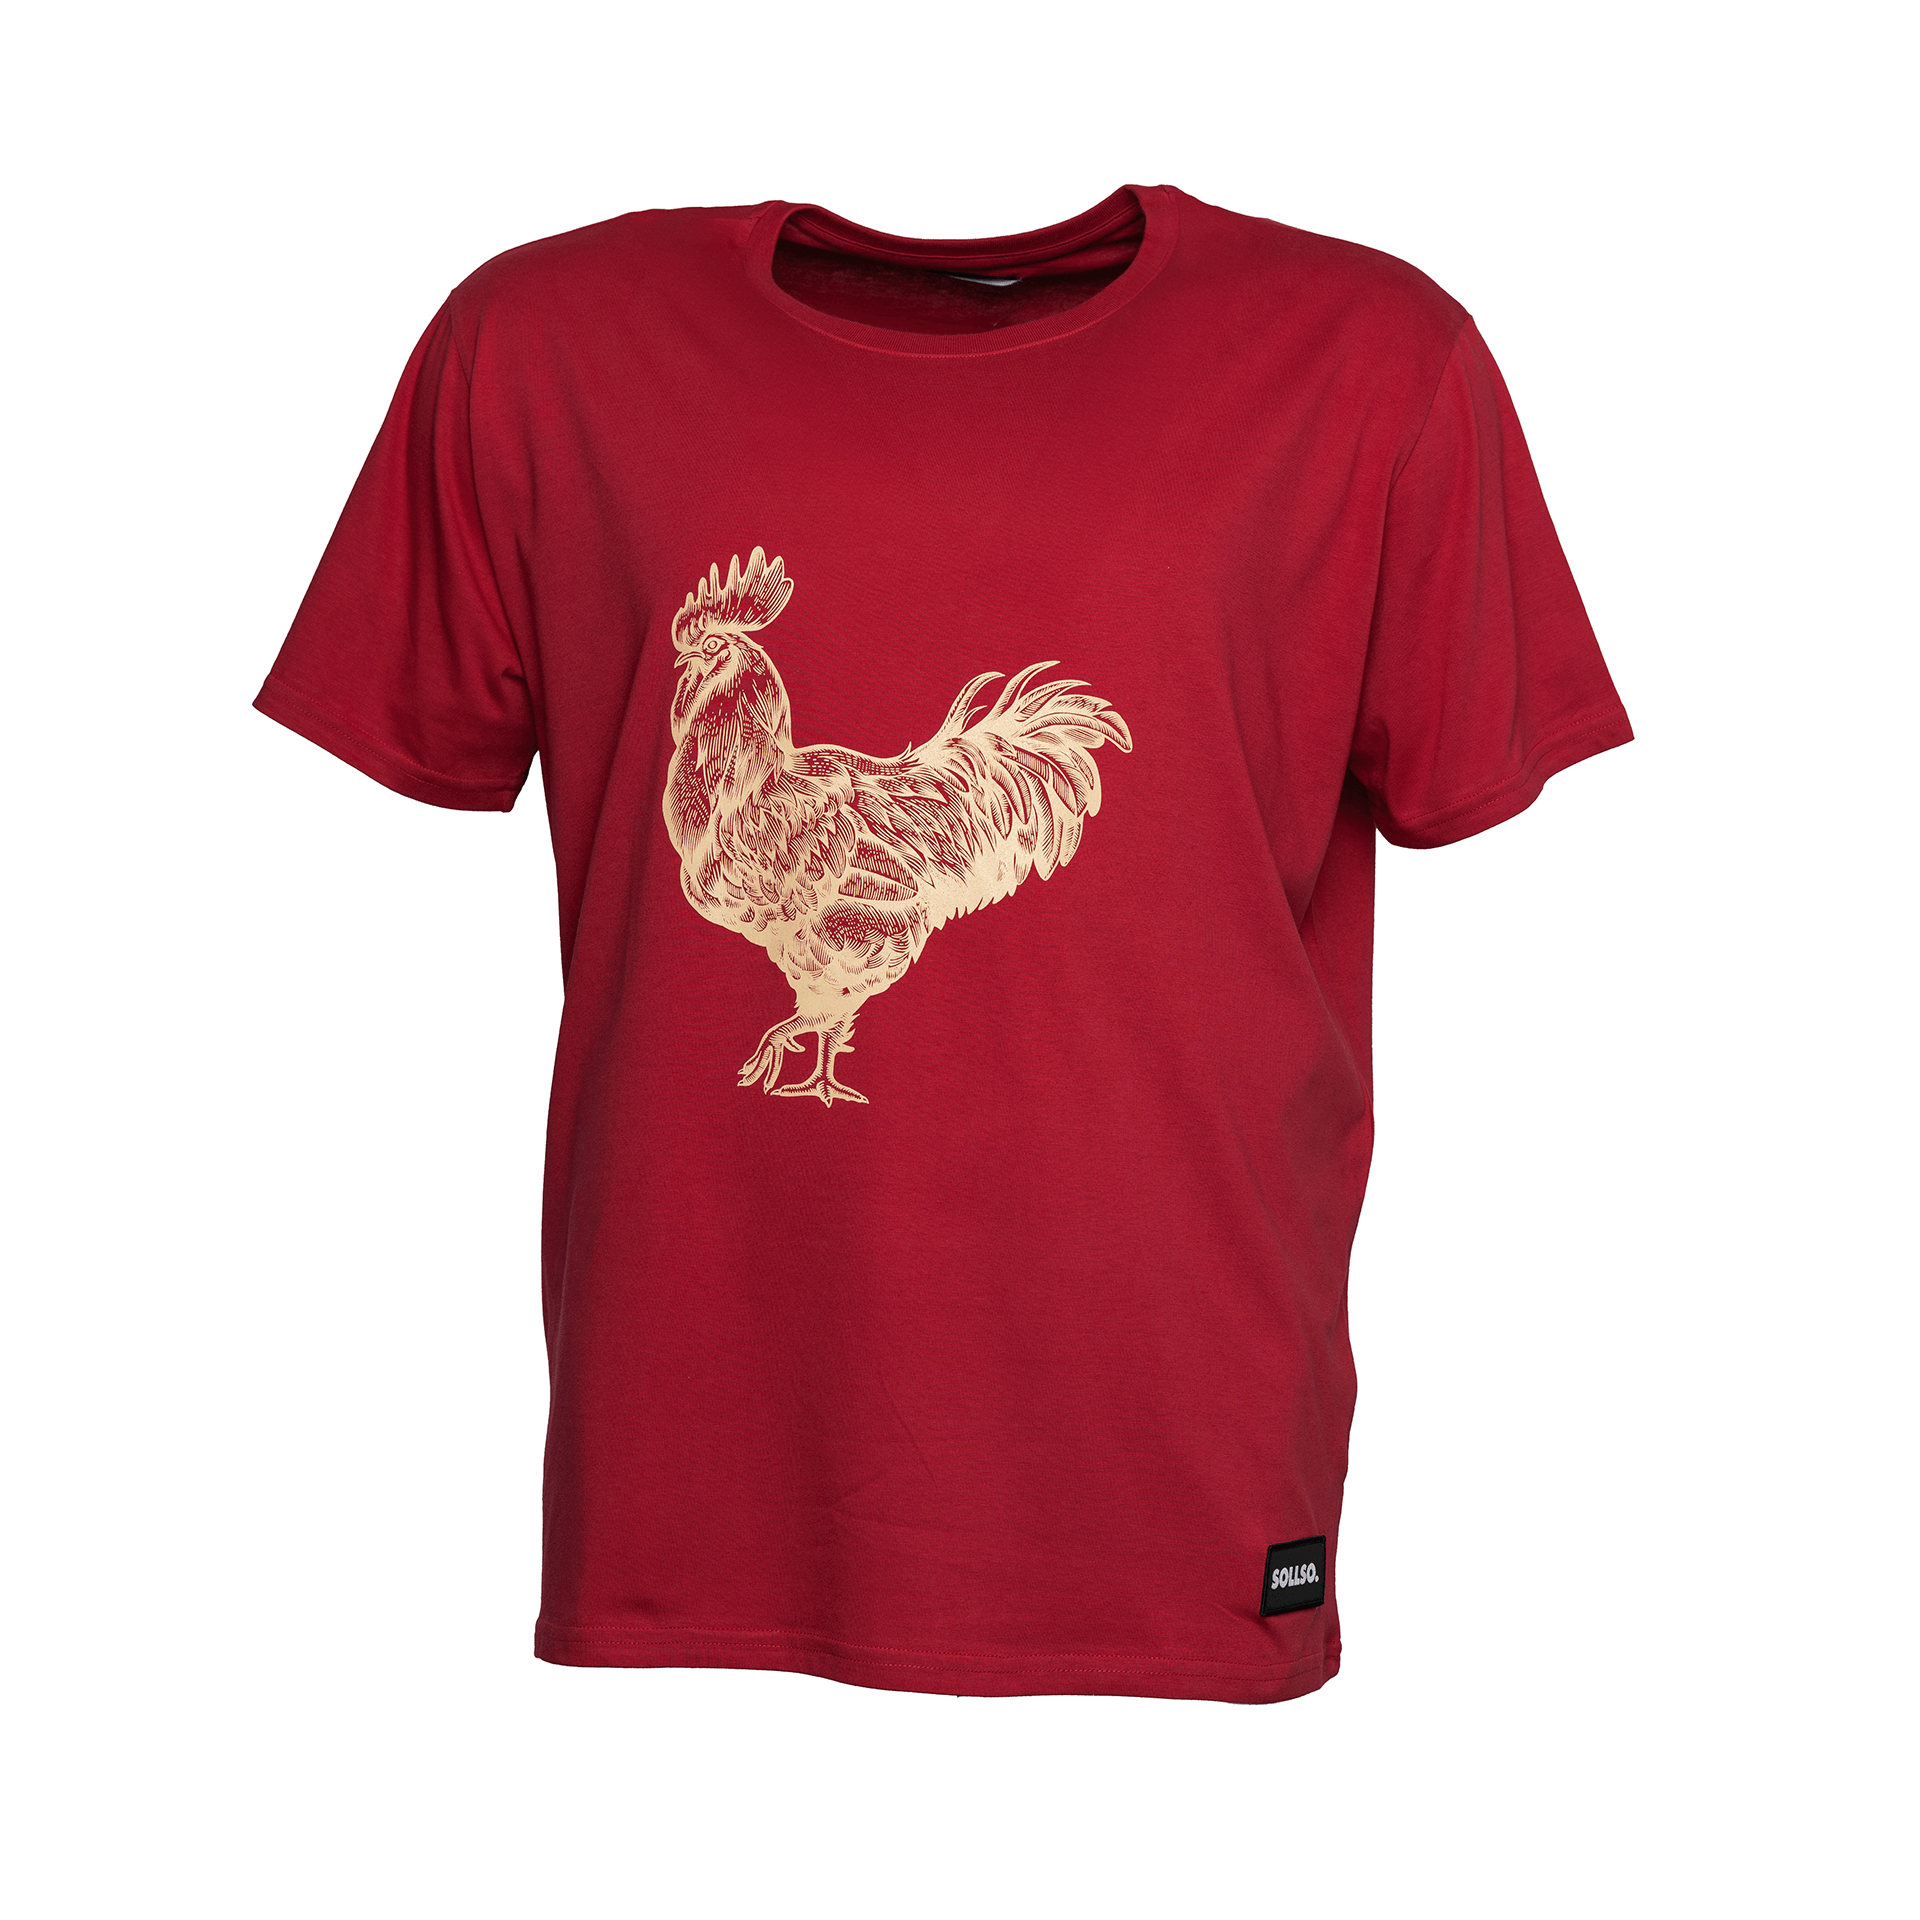 SOLLSO. T-Shirt "Rooster", Farbe Ginger Red, Größe 3XL